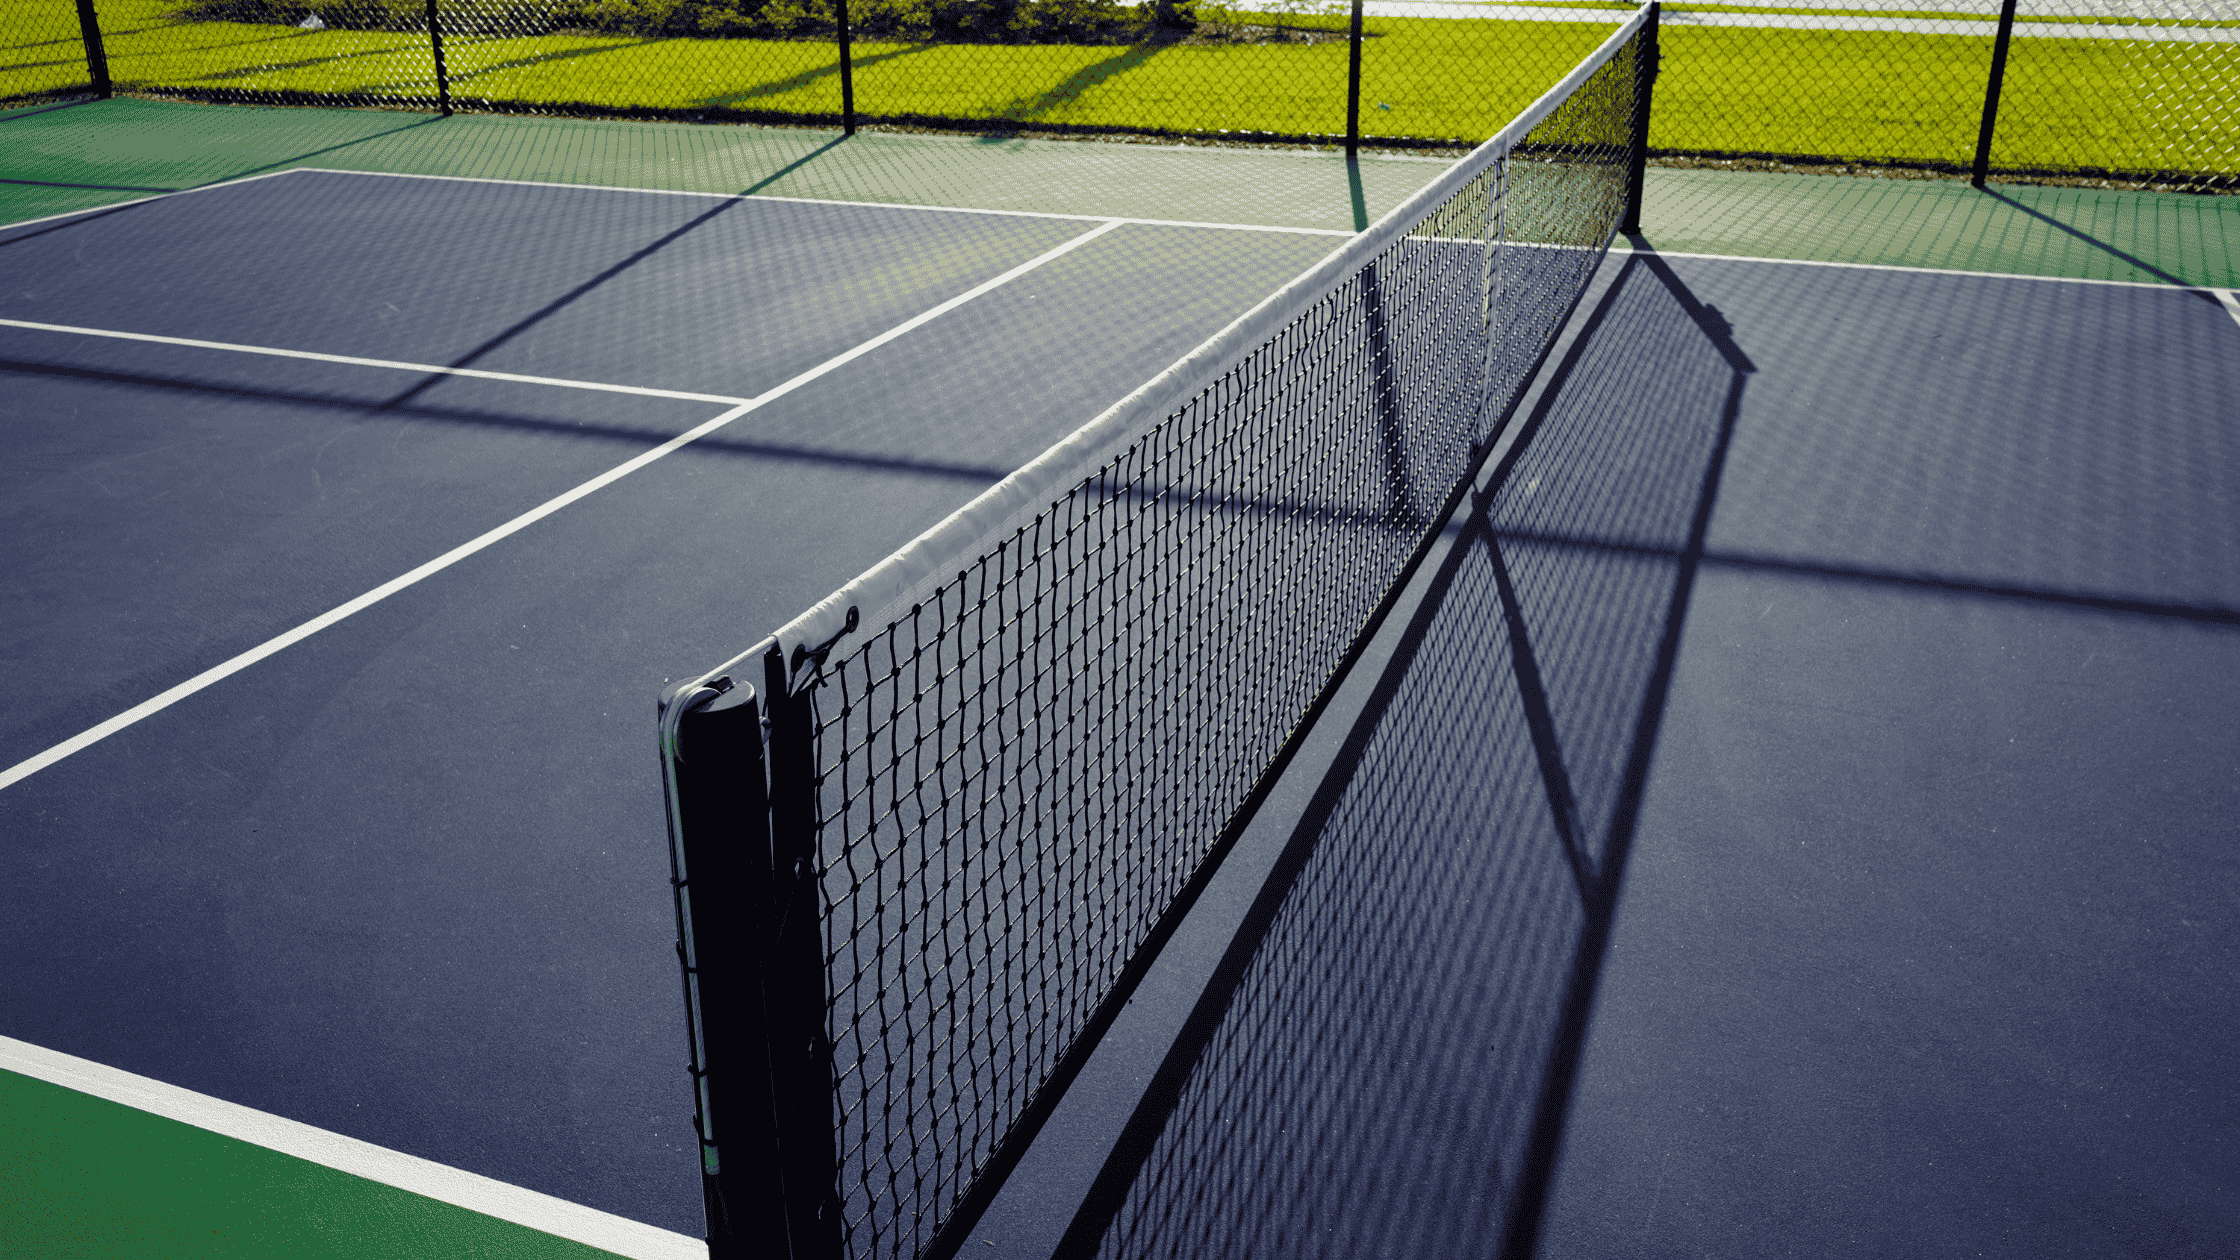 What are the basic rules of pickleball